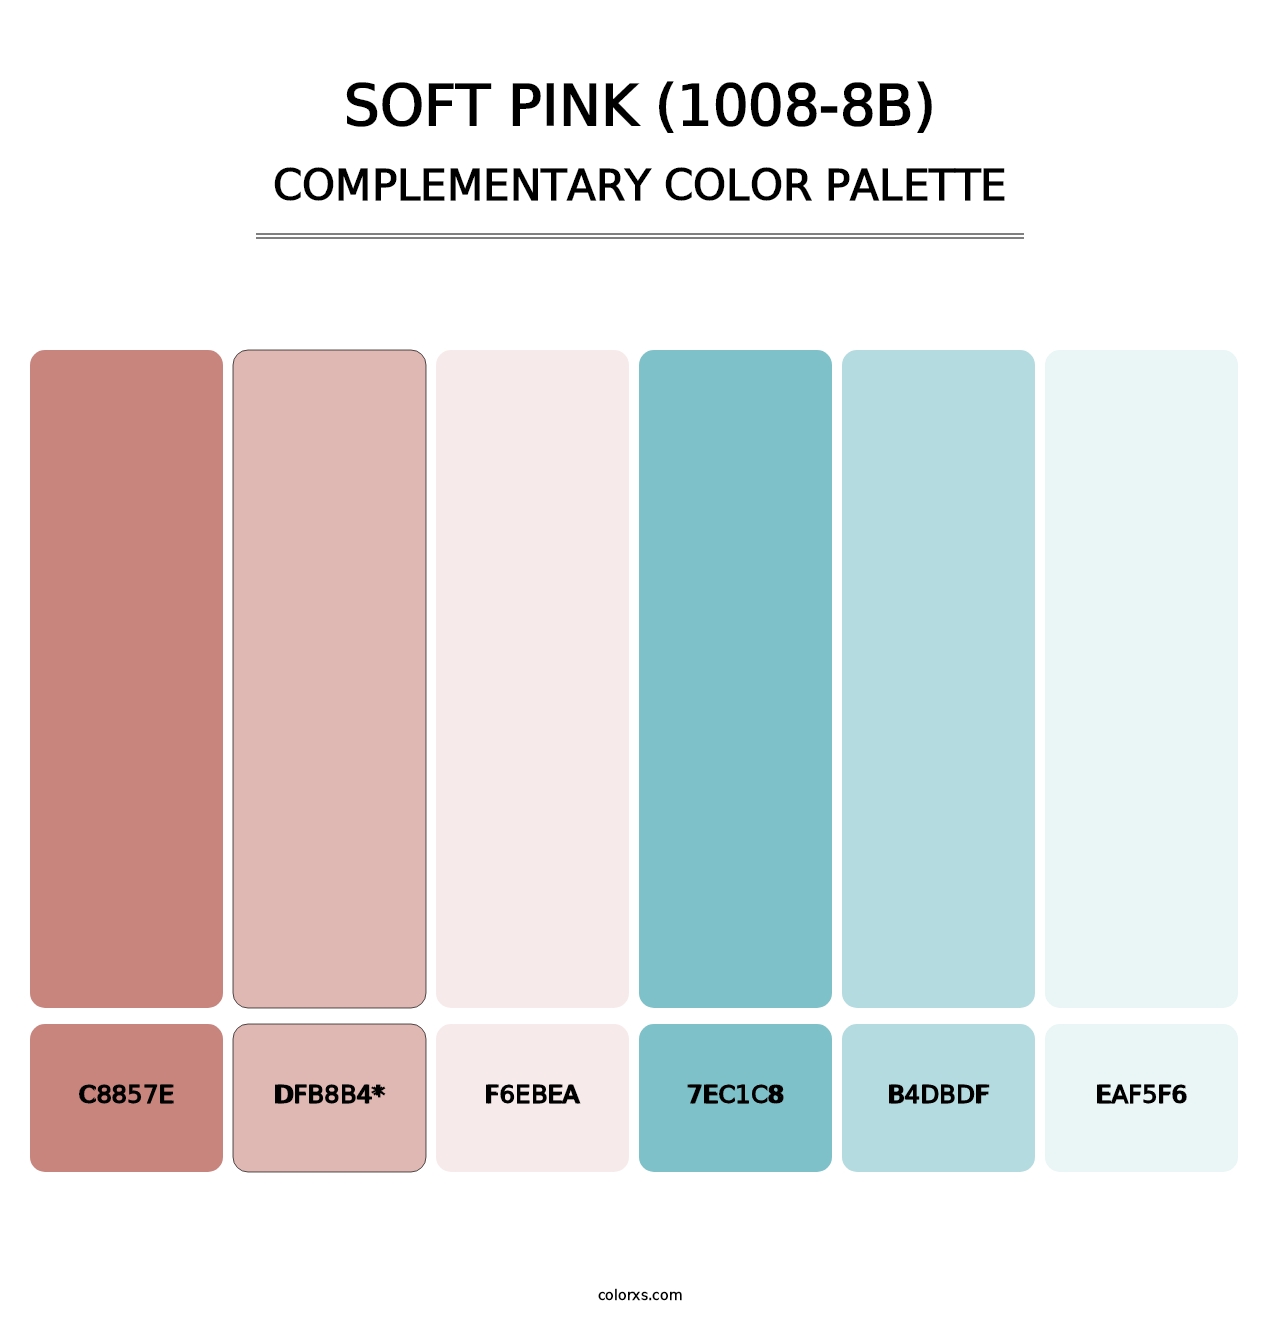 Soft Pink (1008-8B) - Complementary Color Palette